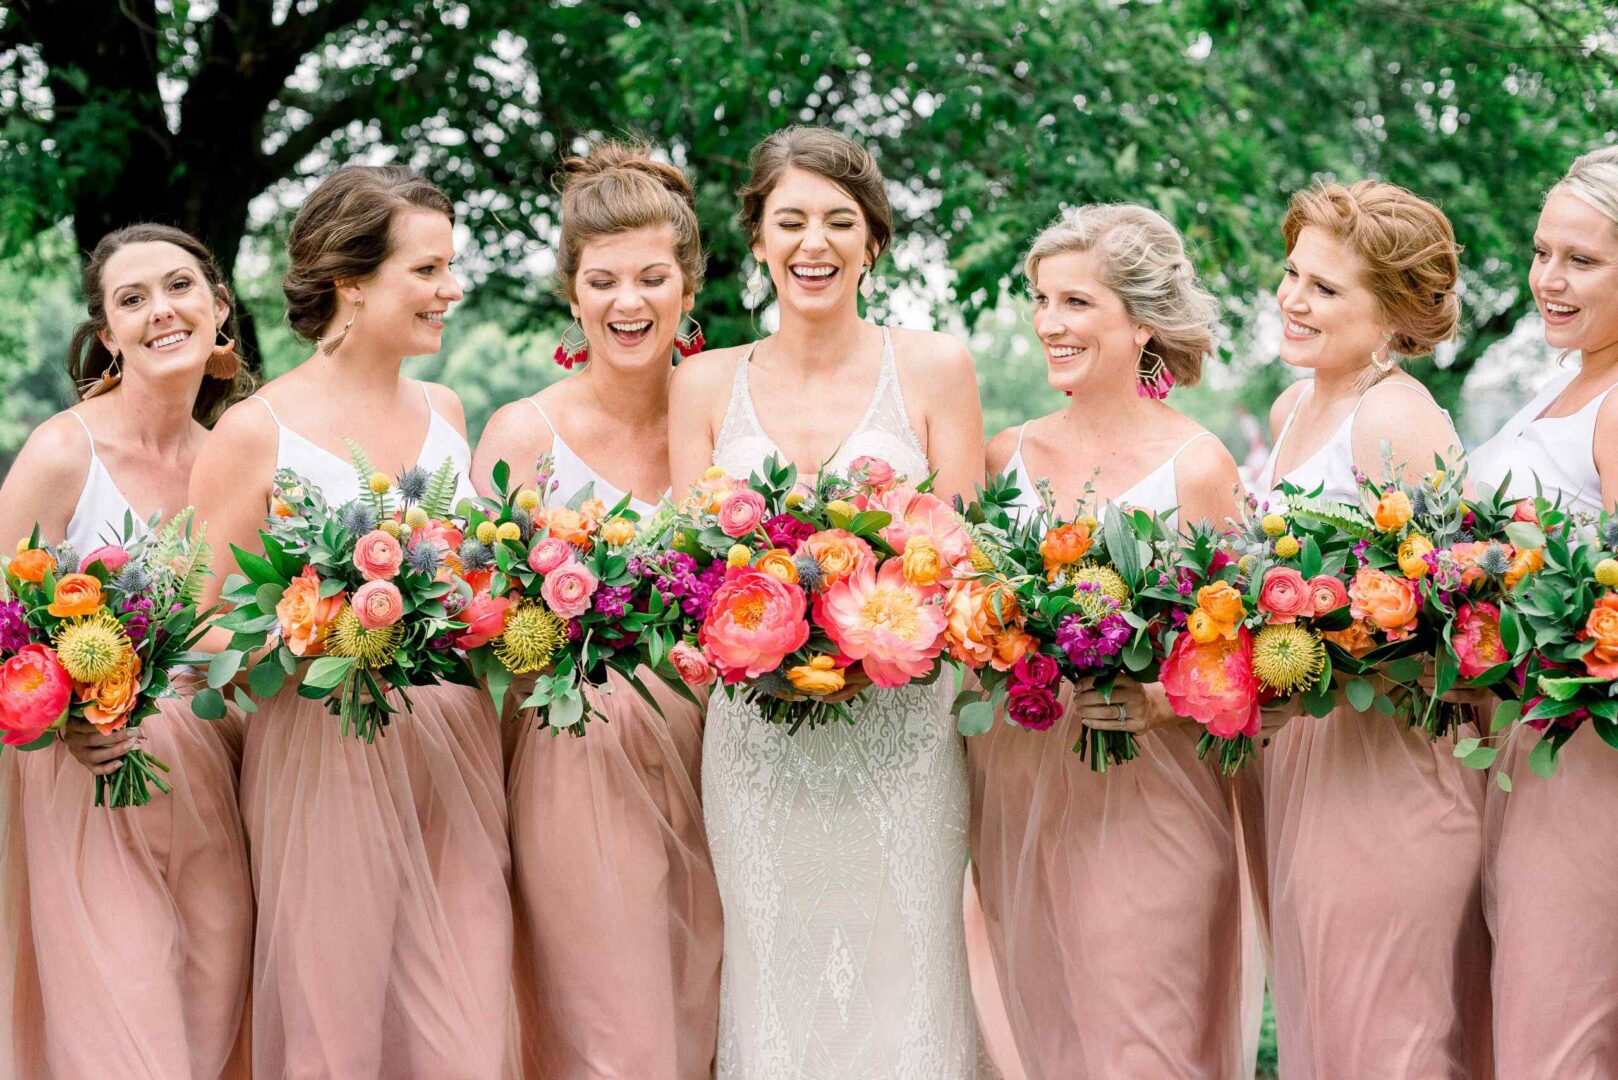 the bride and her bridesmaids holding bouquets of flowers